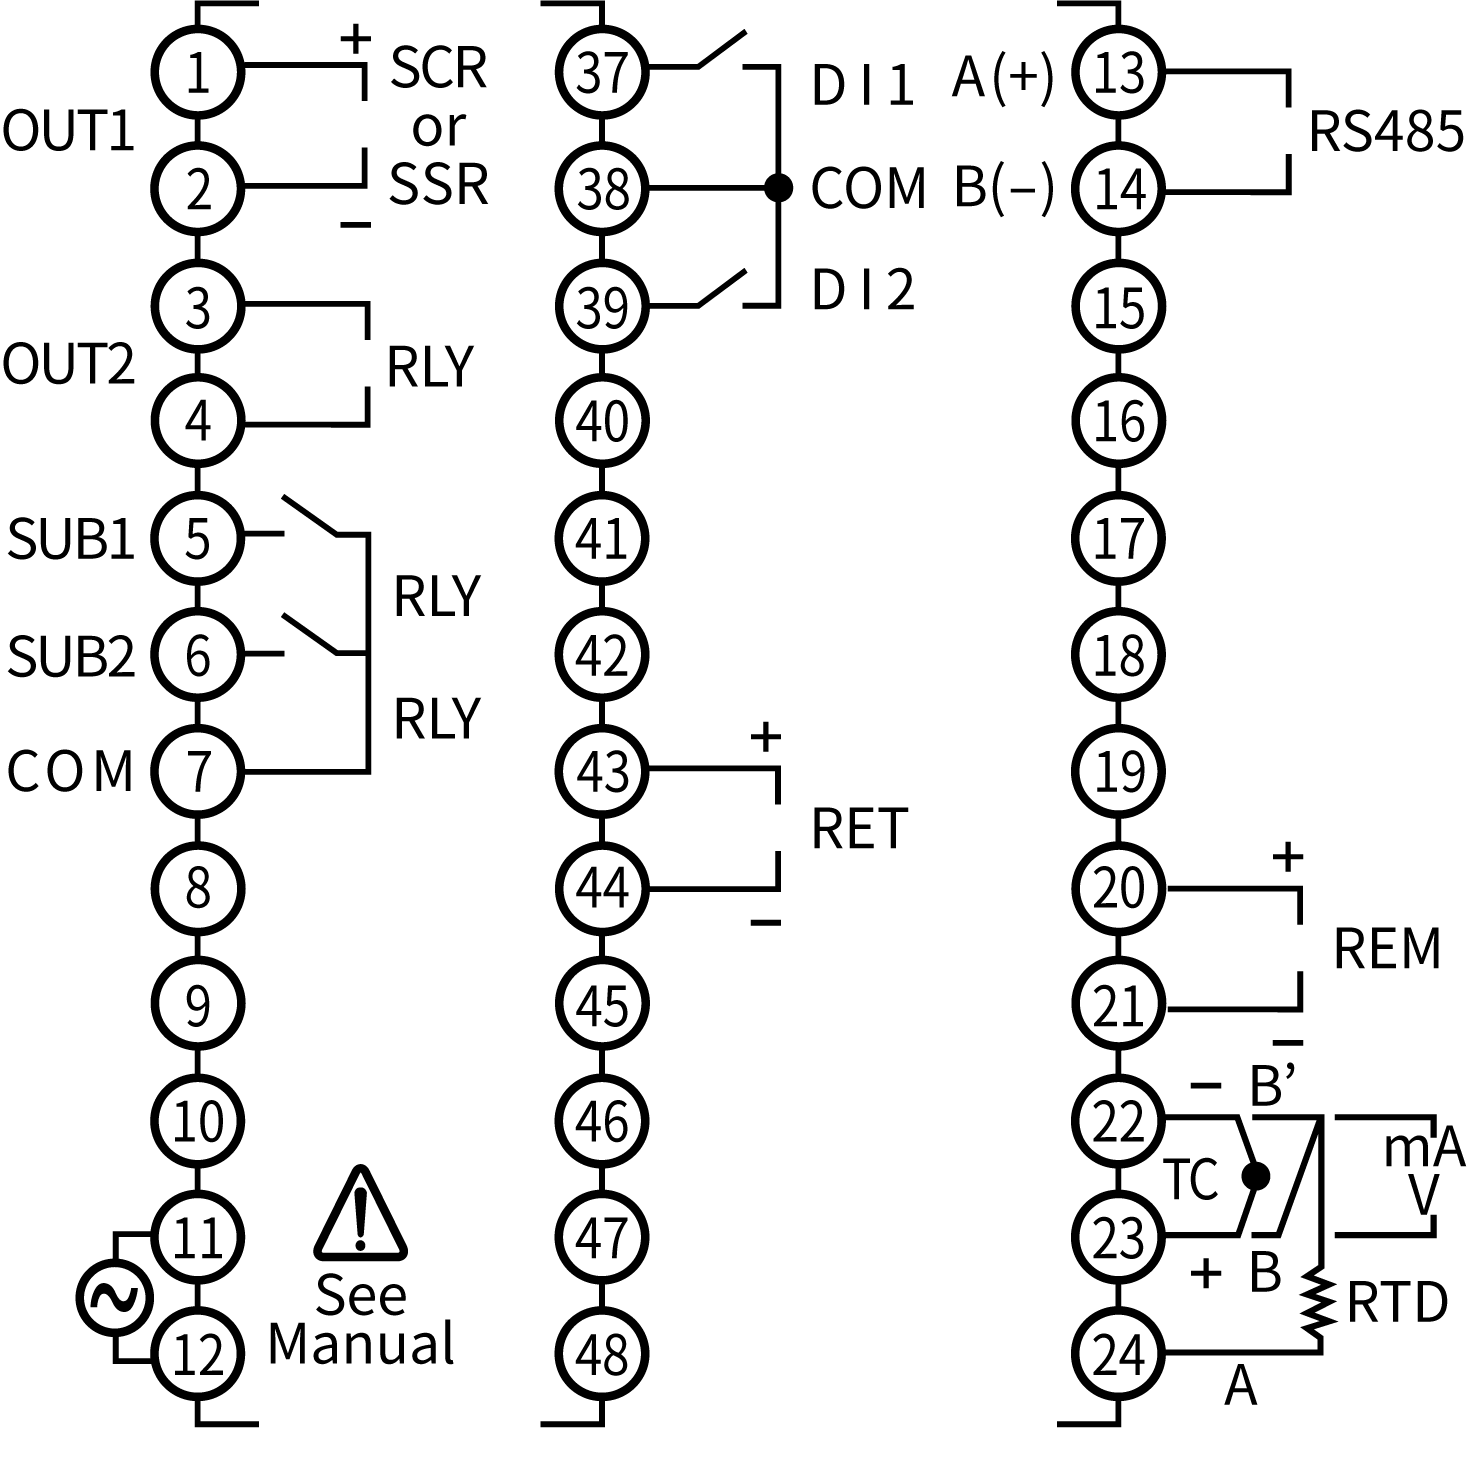 PD510-A or -S (1/16 DIN) Connections